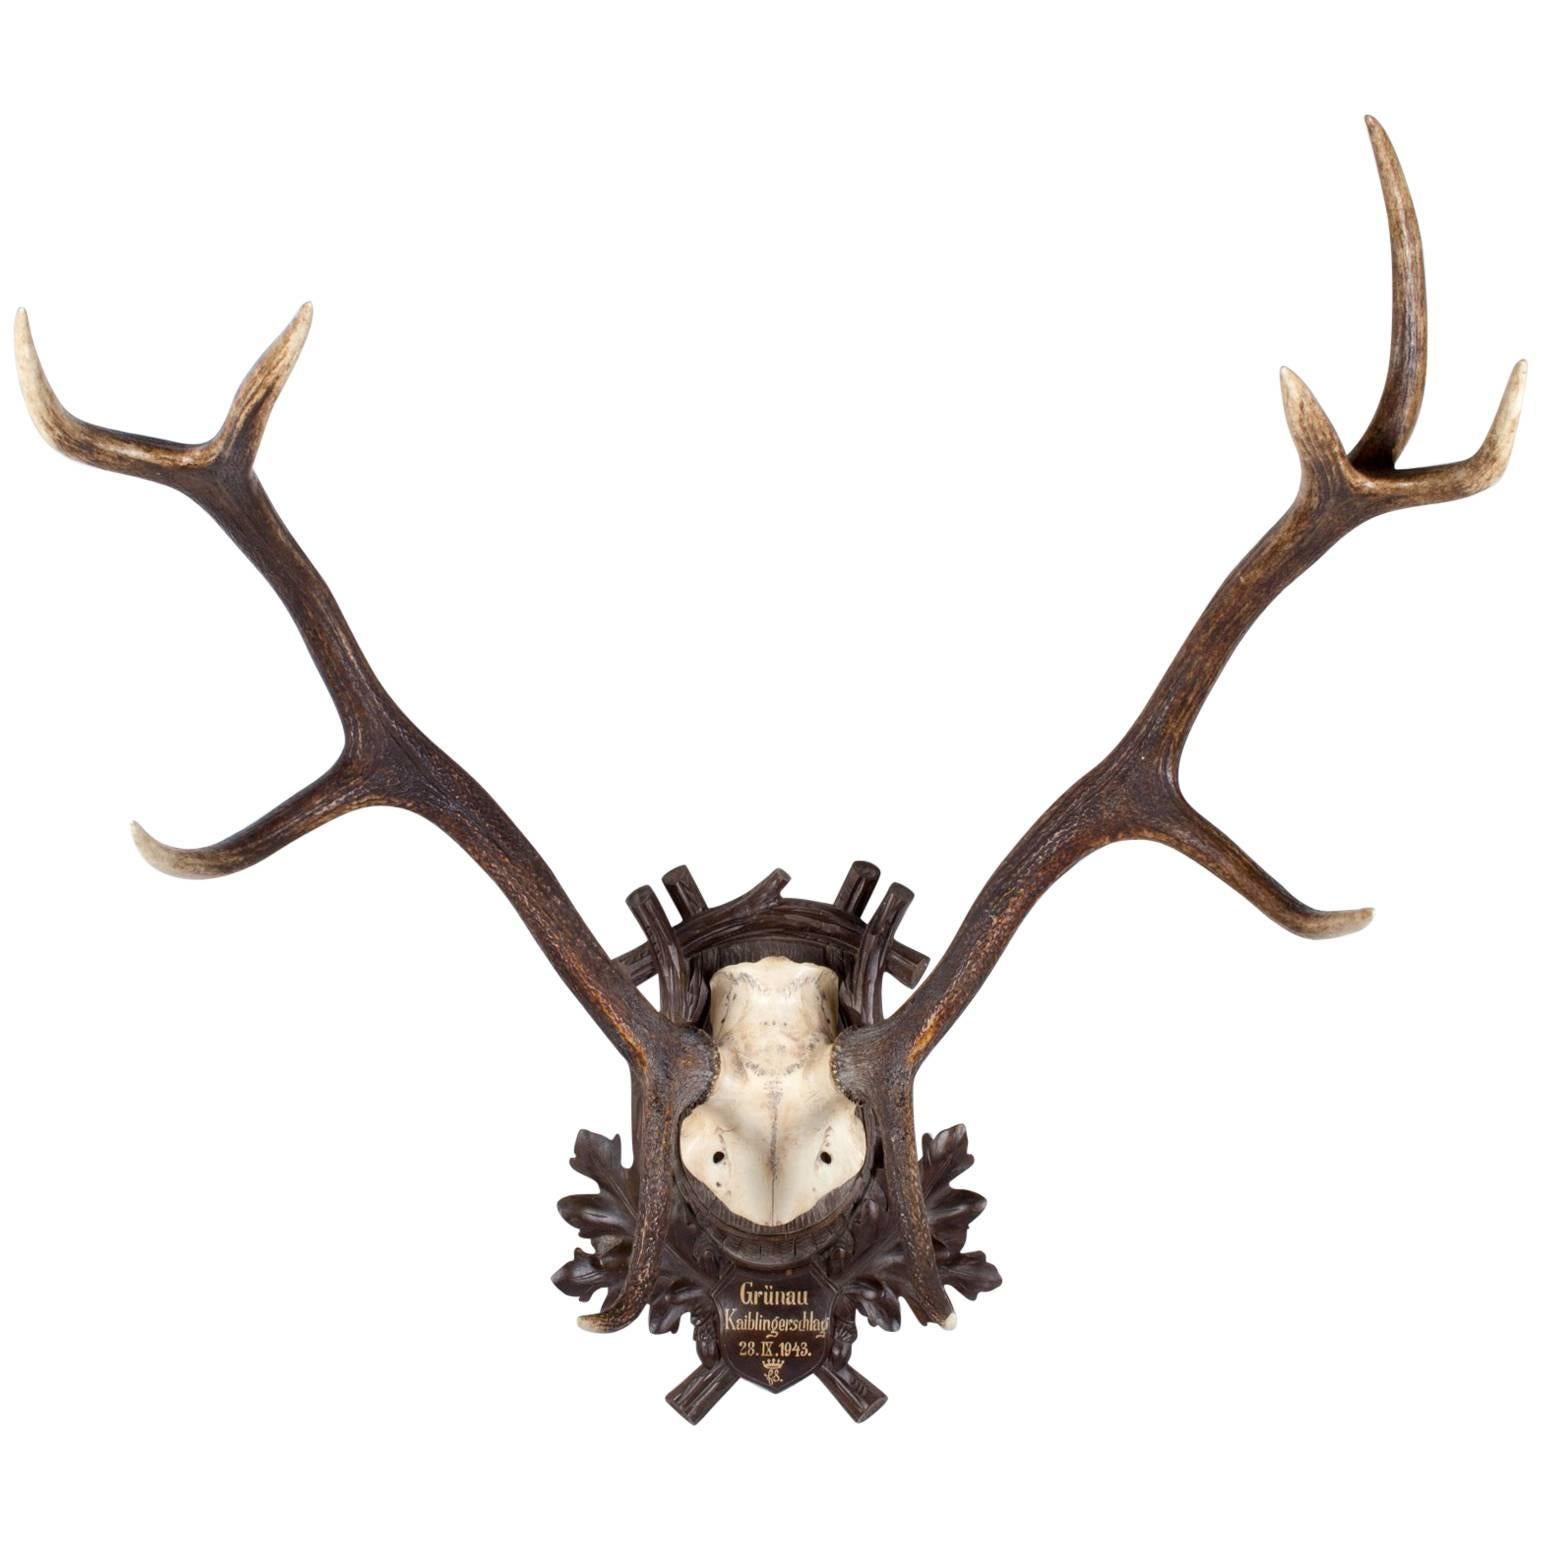 1940s German Red Stag Trophy on Black Forest Plaque from Grünau Valley Austria